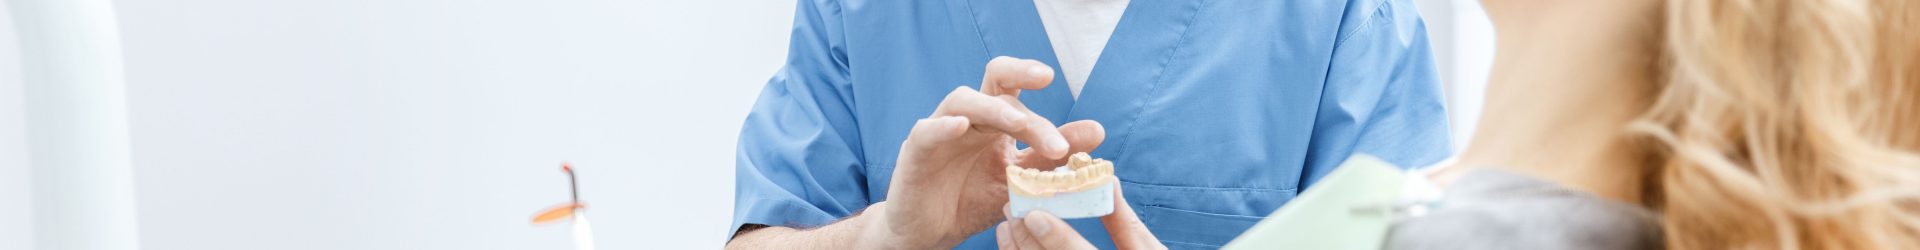 Dental implant surgery is not as scary as it seems